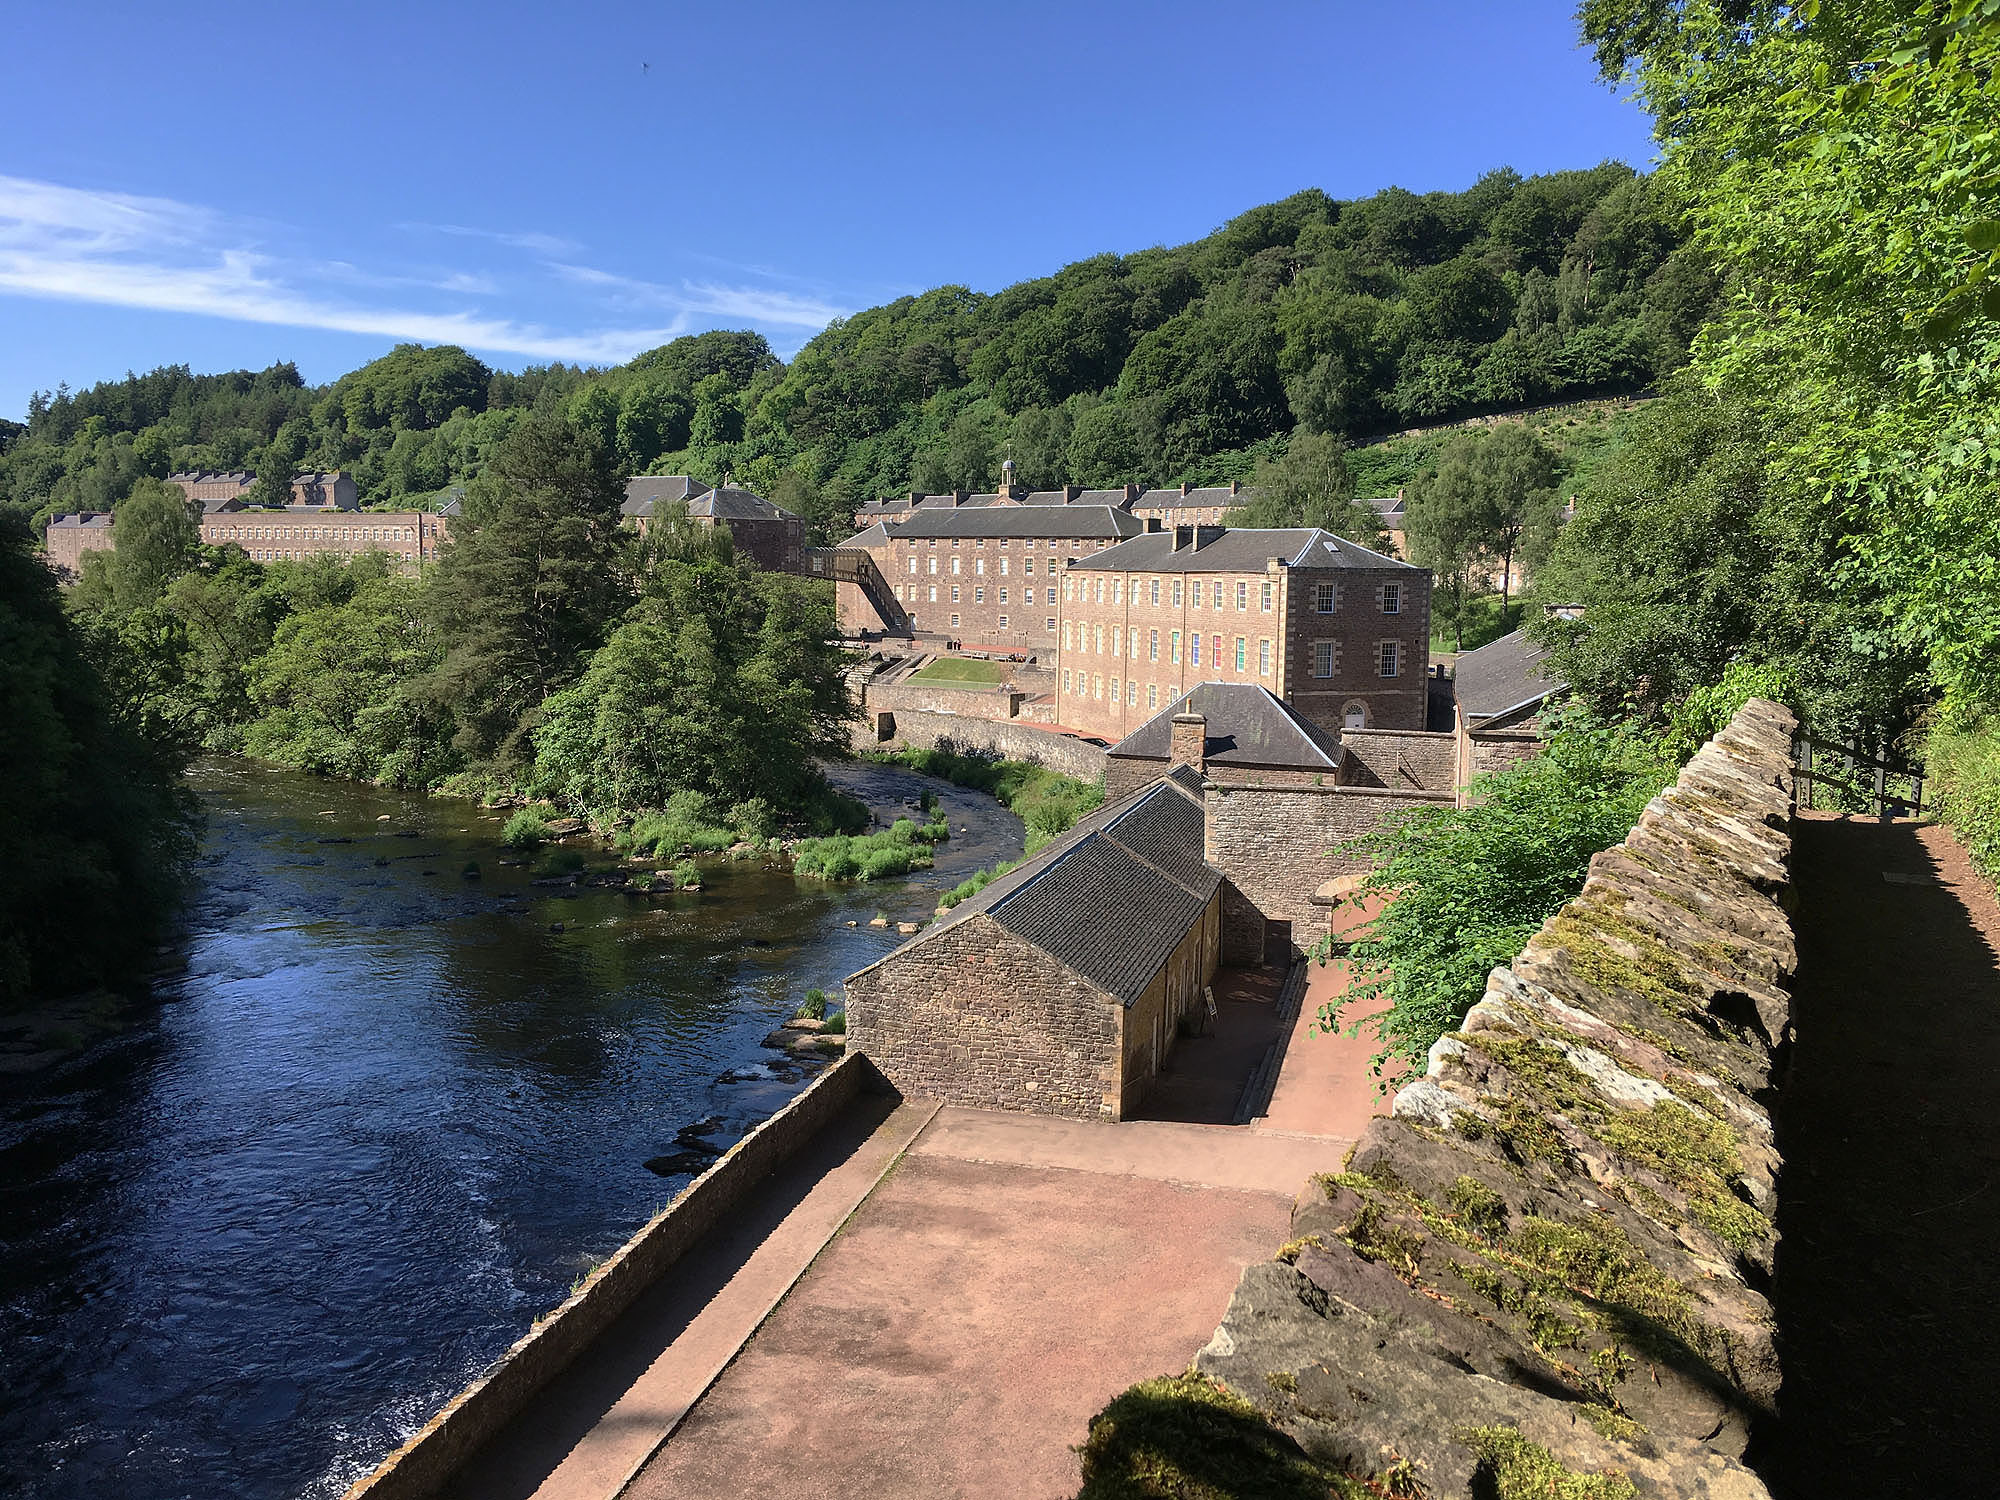 New Lanark and the River Clyde, photograph by Ritsert Rinsma